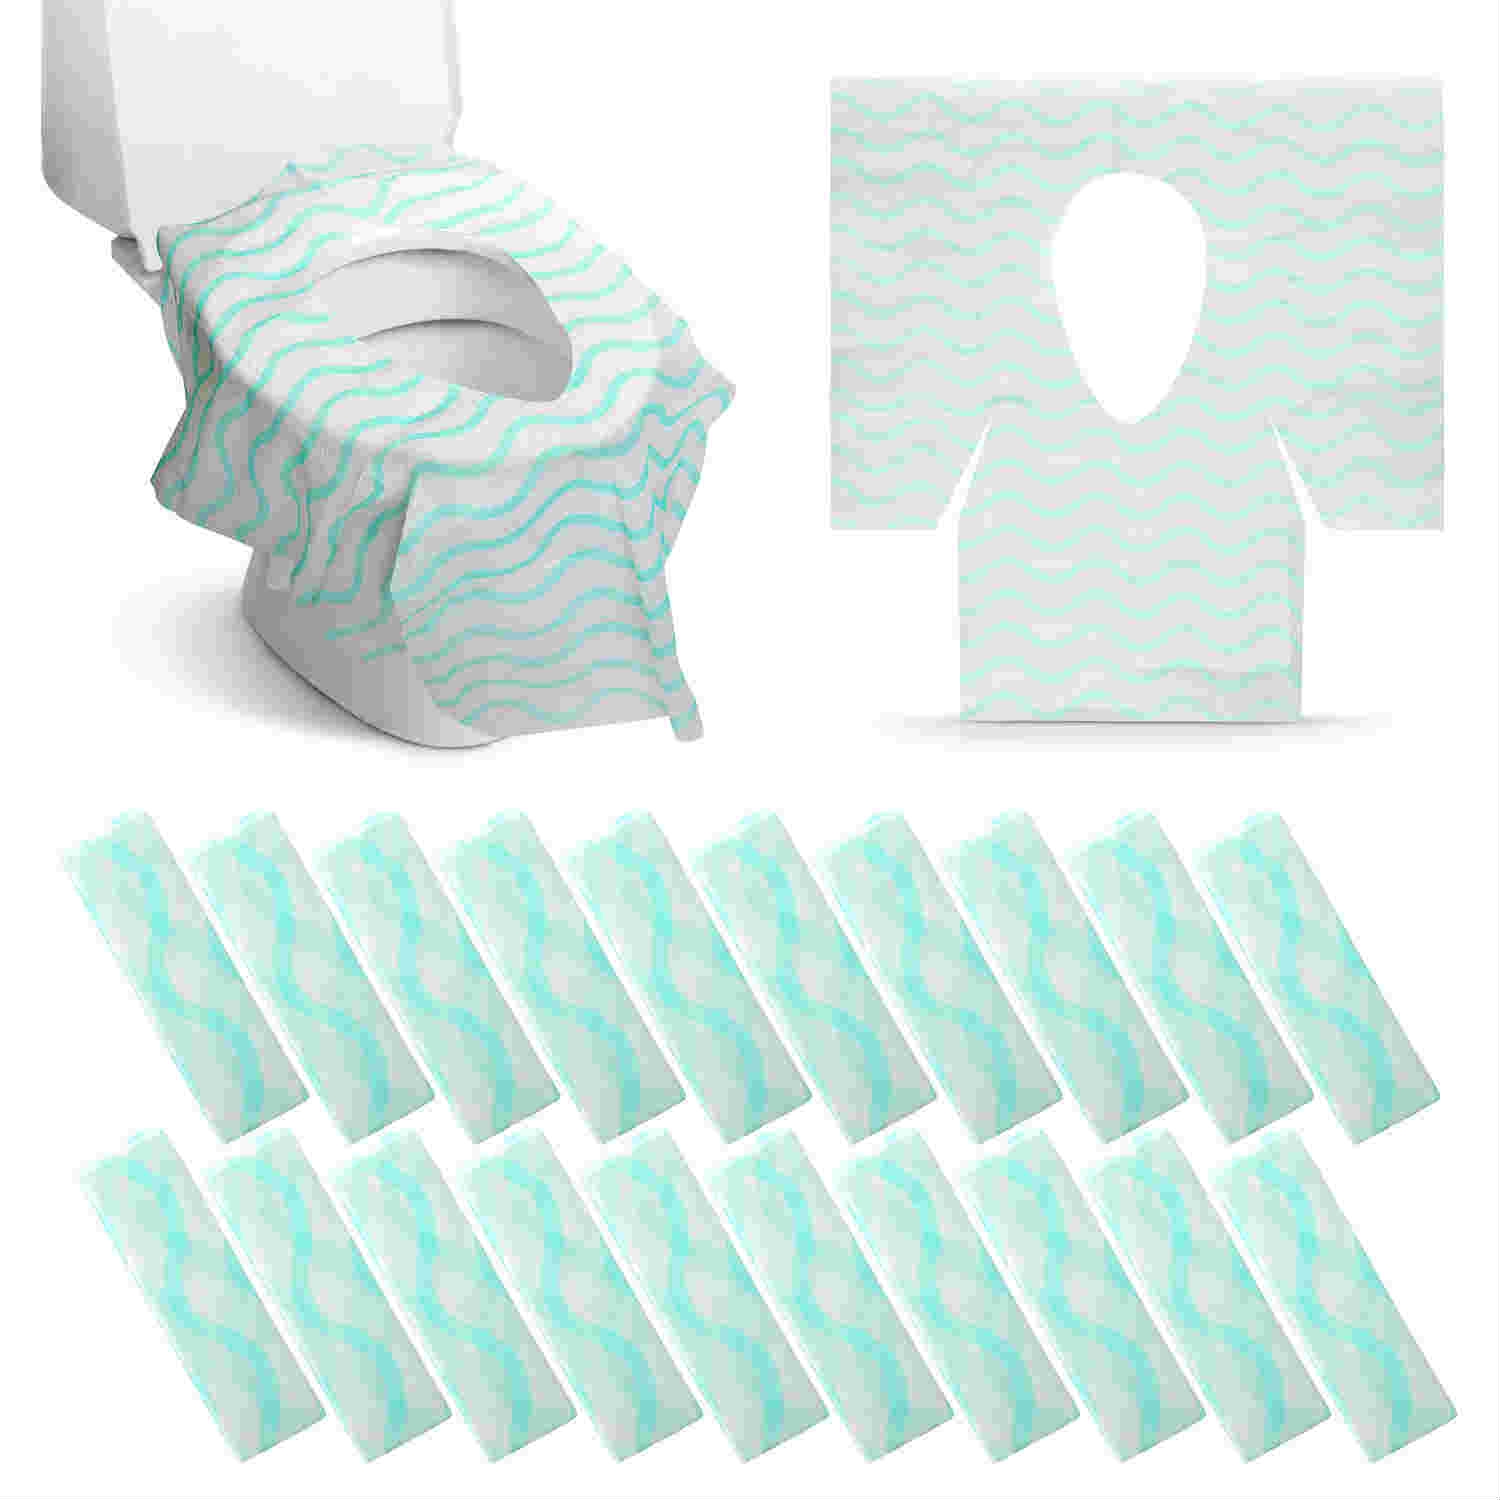 Disposable Toilet Seat Covers Extra Large 20 Packs Perfect for Adults and Kids Potty Training with Individually Wrapped Home Travel Use (New Wave)